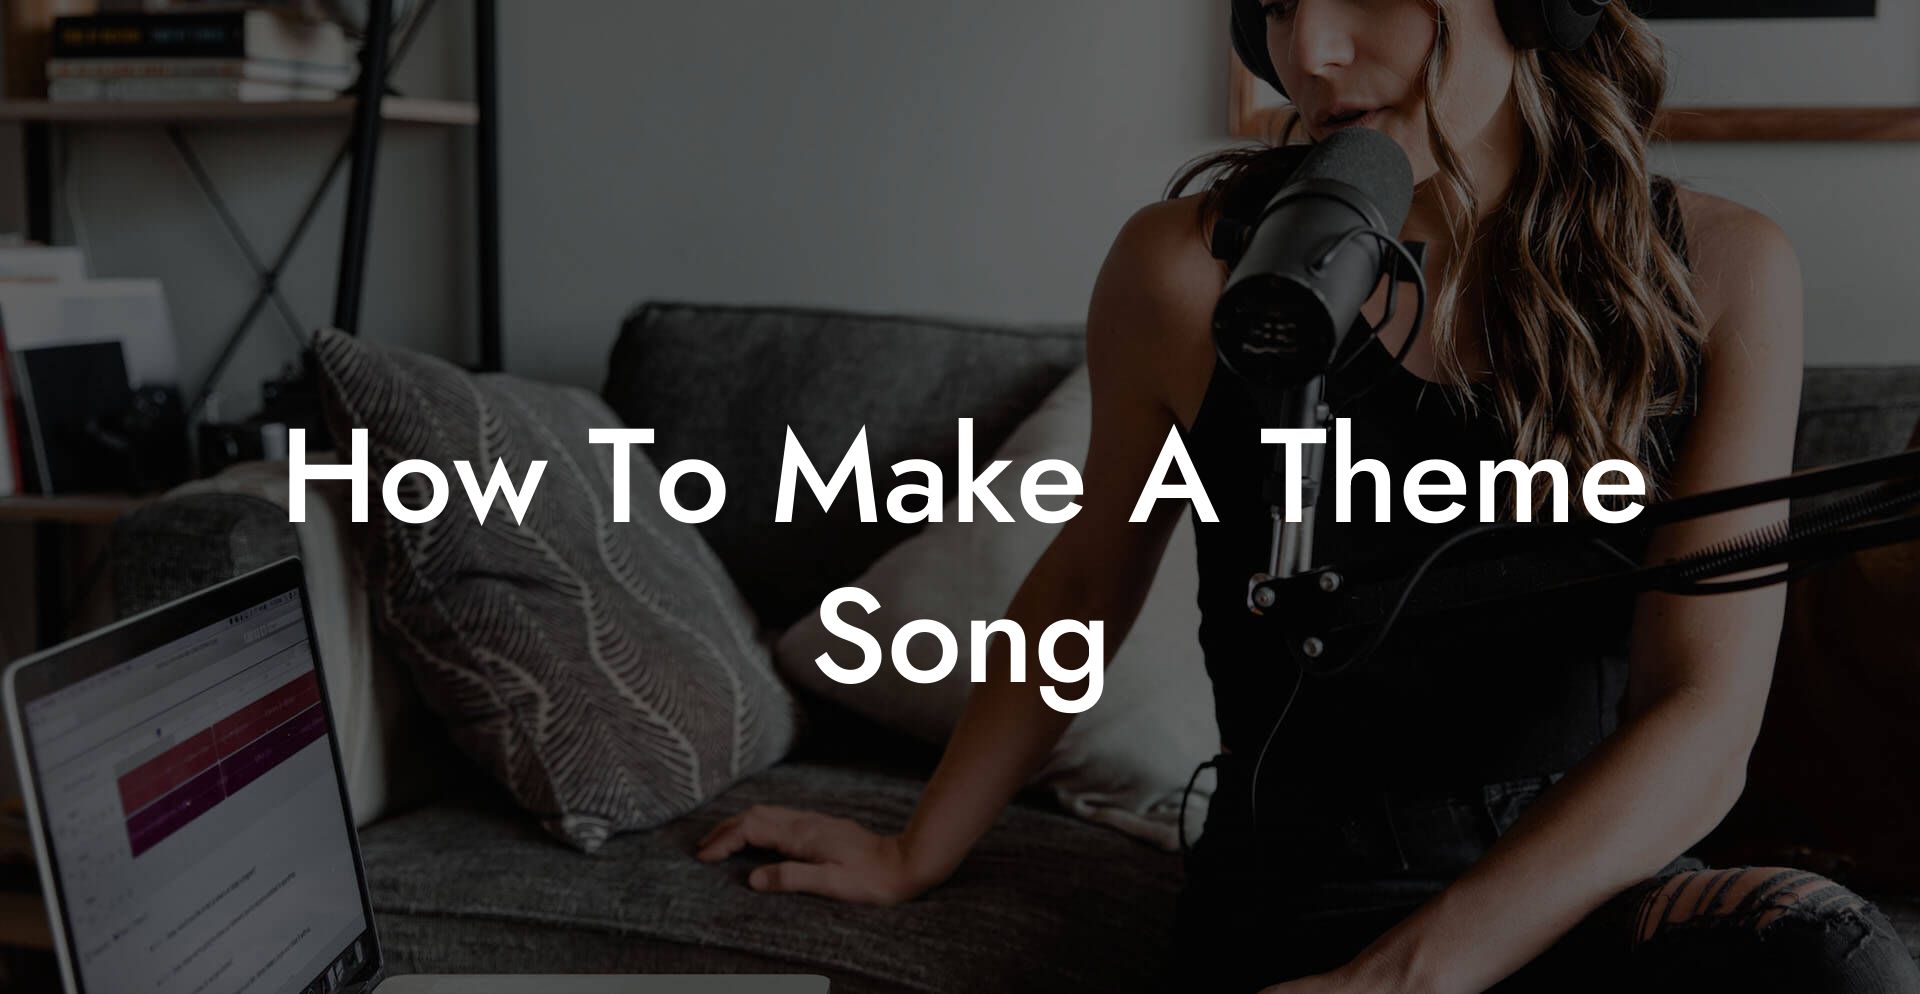 how to make a theme song lyric assistant